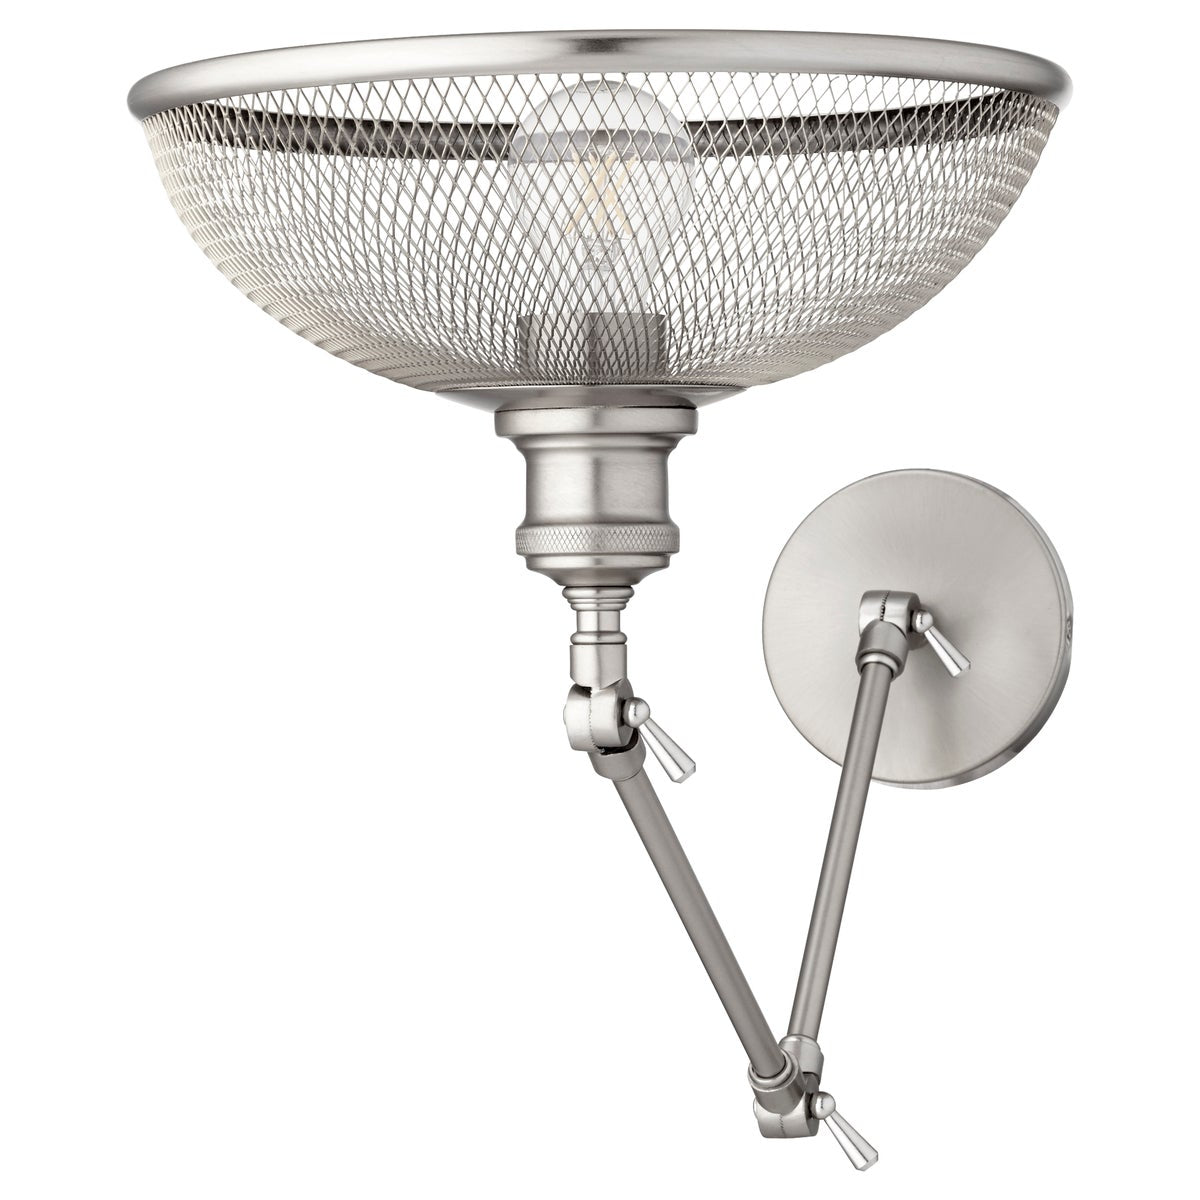 Industrial Wall Sconce with wire mesh shade and subtle bulbs, showcasing crisscross patterns and repeating angles. Versatile transitional styling for contemporary and traditional settings. 12"W x 11.5"H x 24"E.